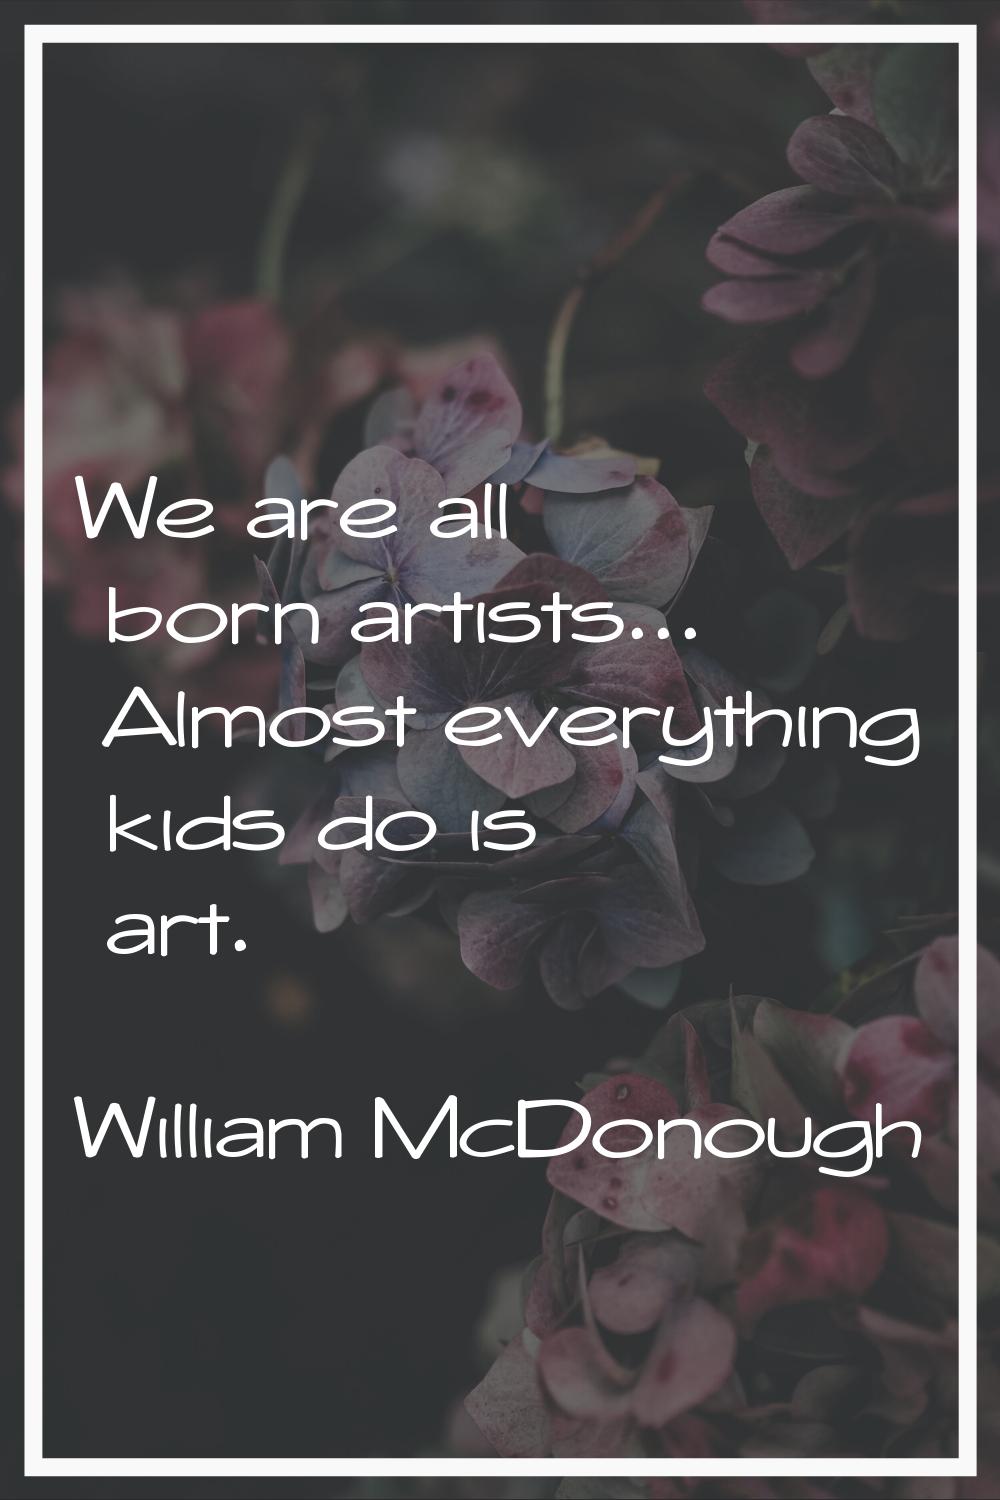 We are all born artists... Almost everything kids do is art.